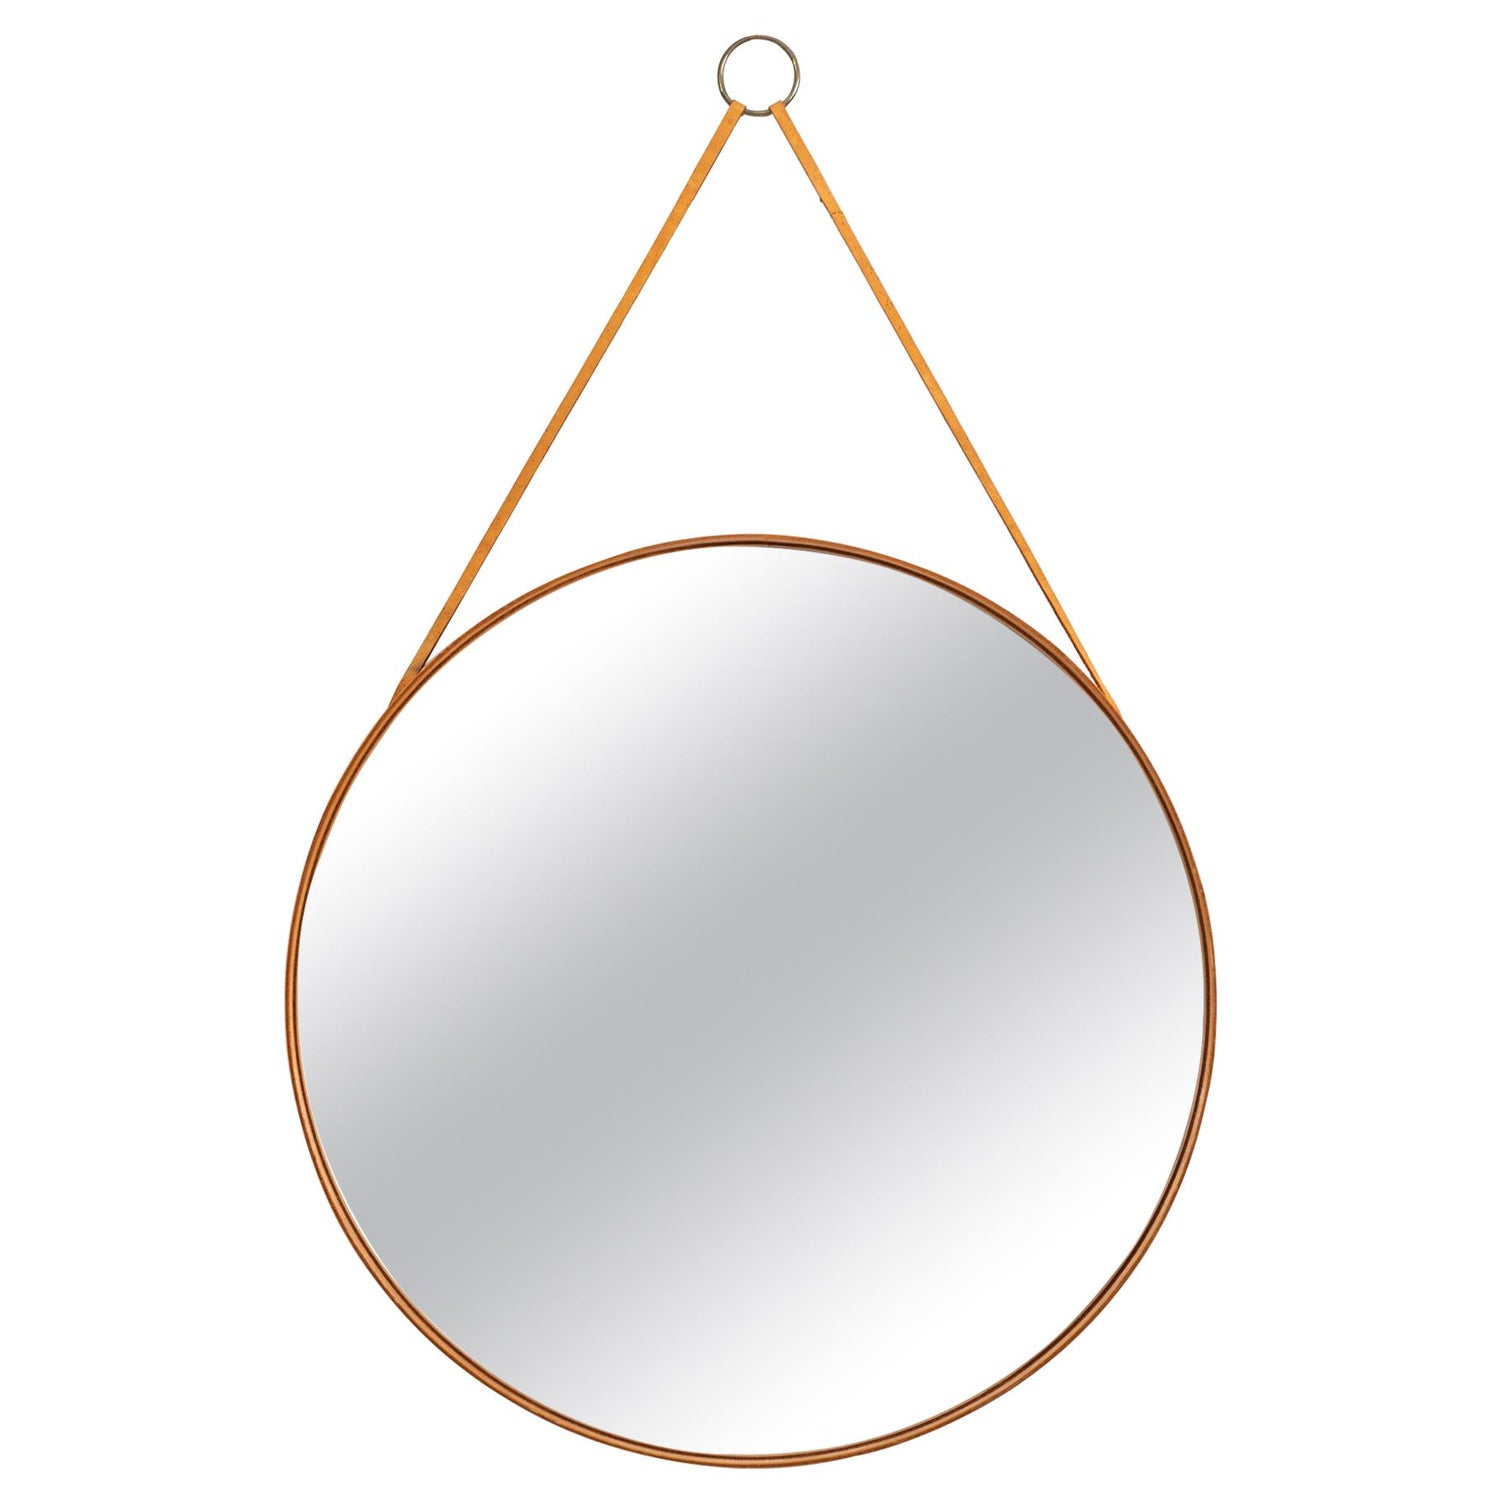 Round Mirror in Teak and Leather Produced by Glasmäster in Markaryd, Sweden  For Sale at 1stDibs